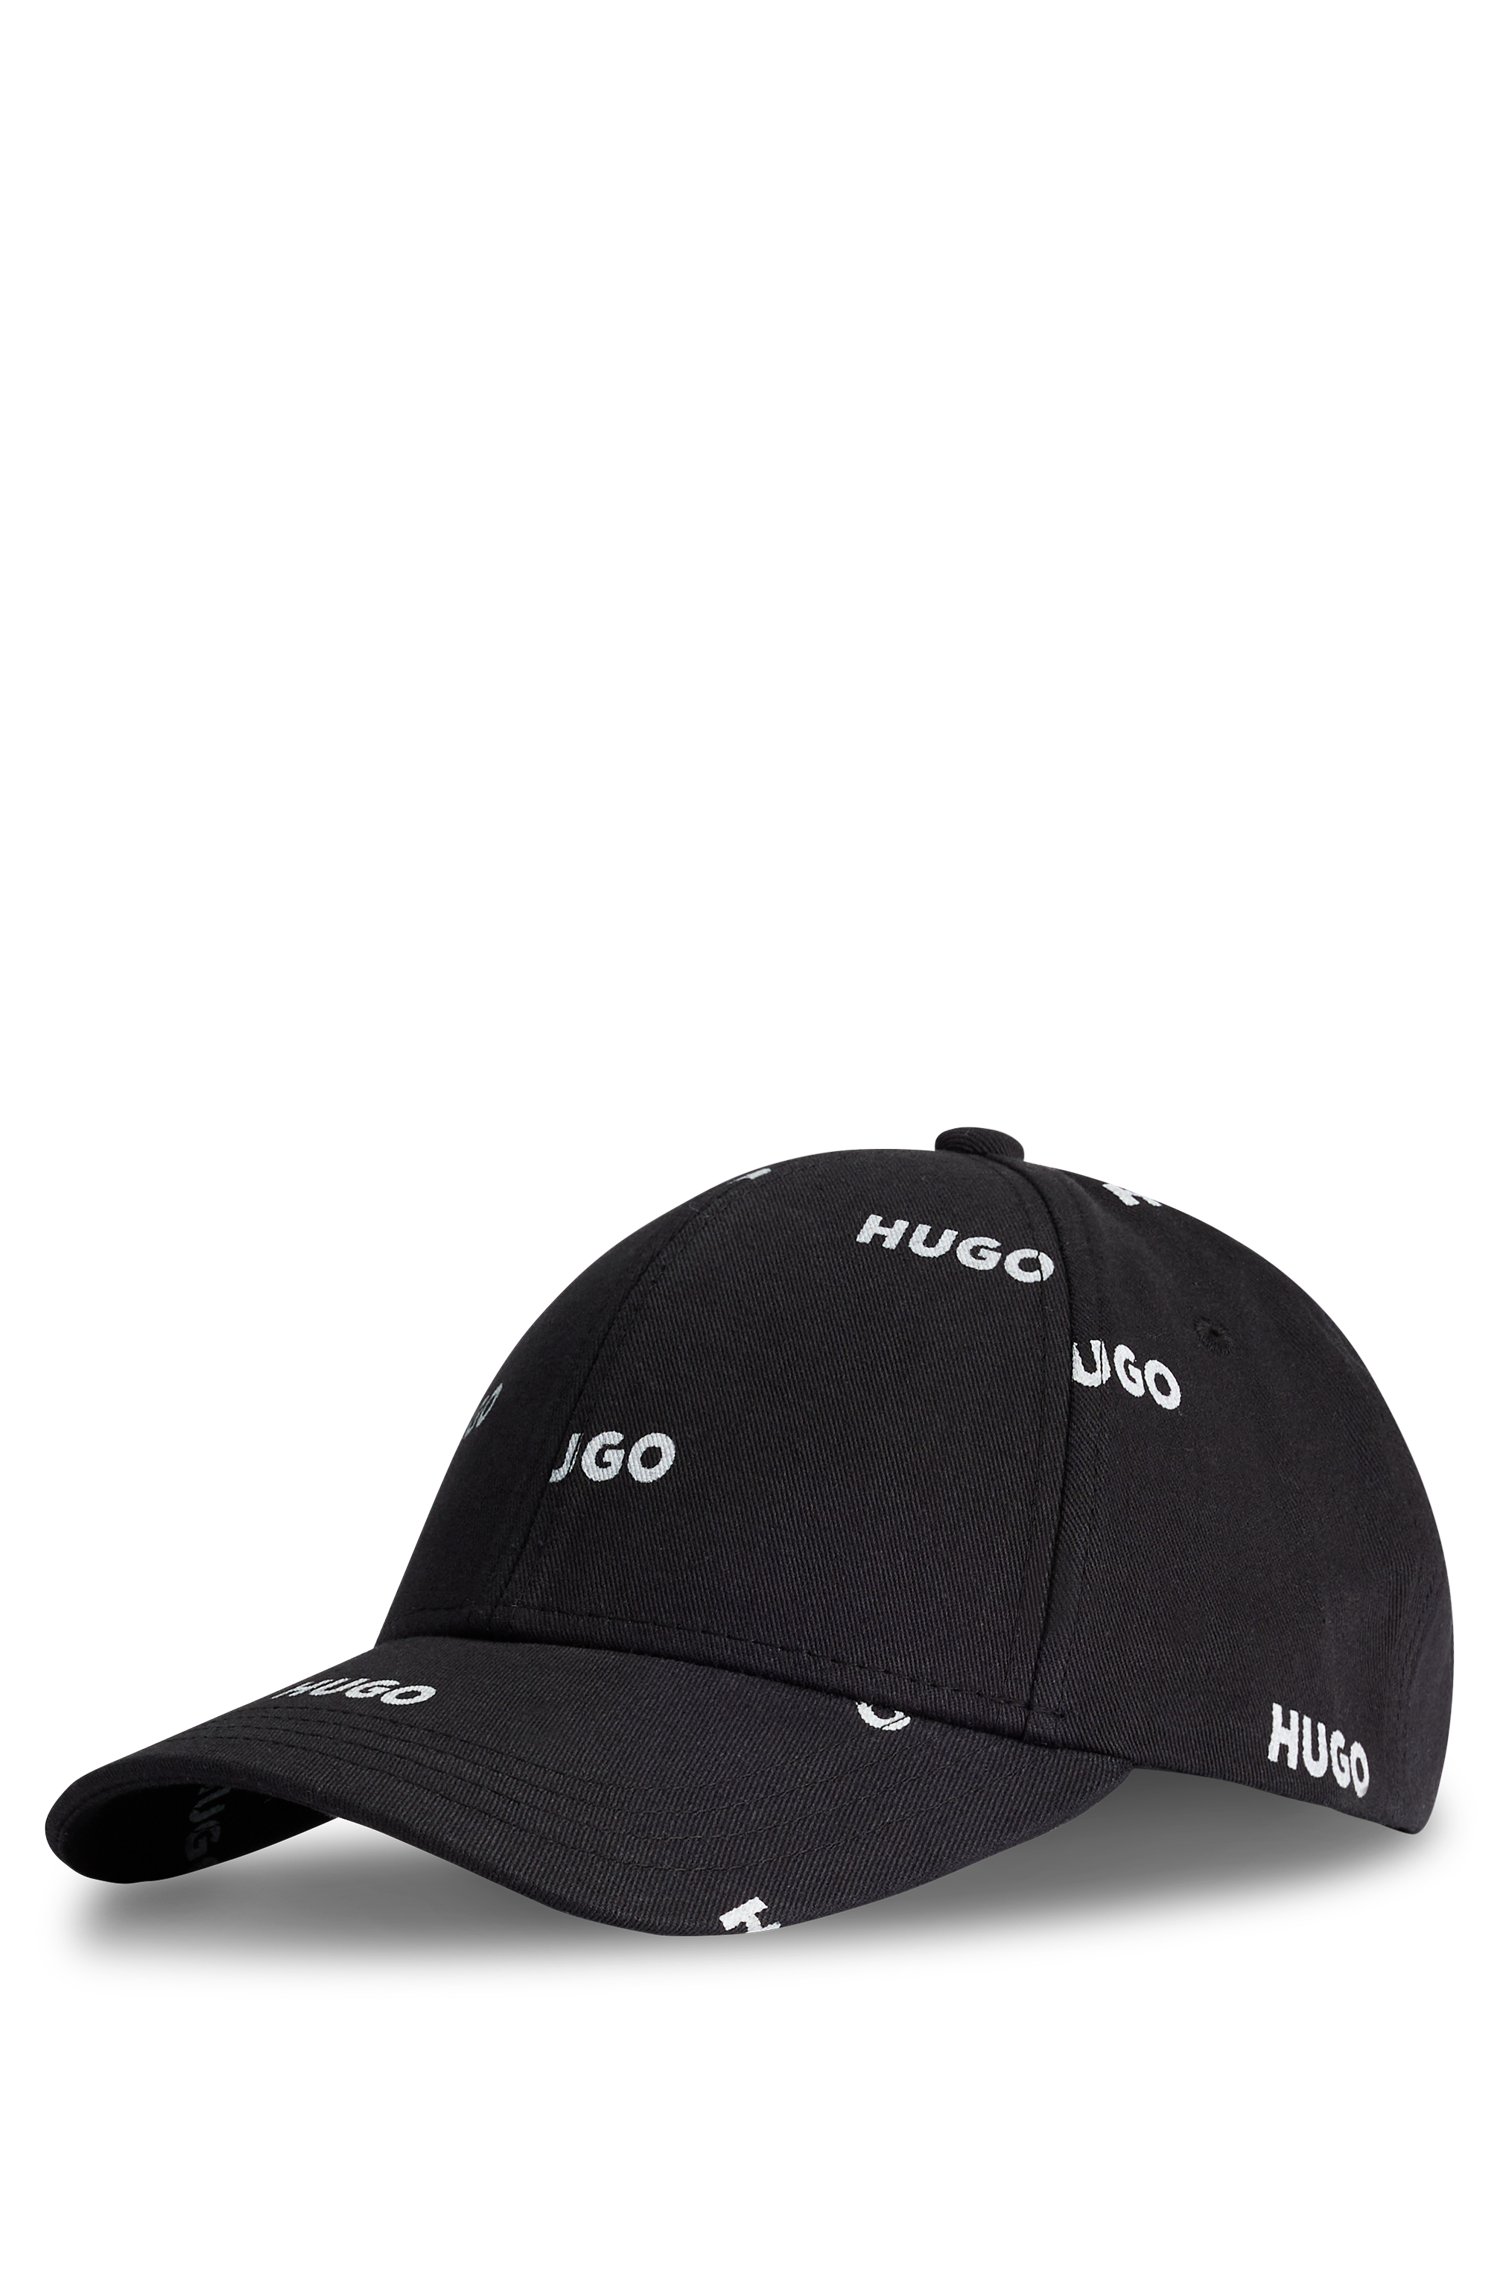 Cotton-twill six-panel cap with printed logos